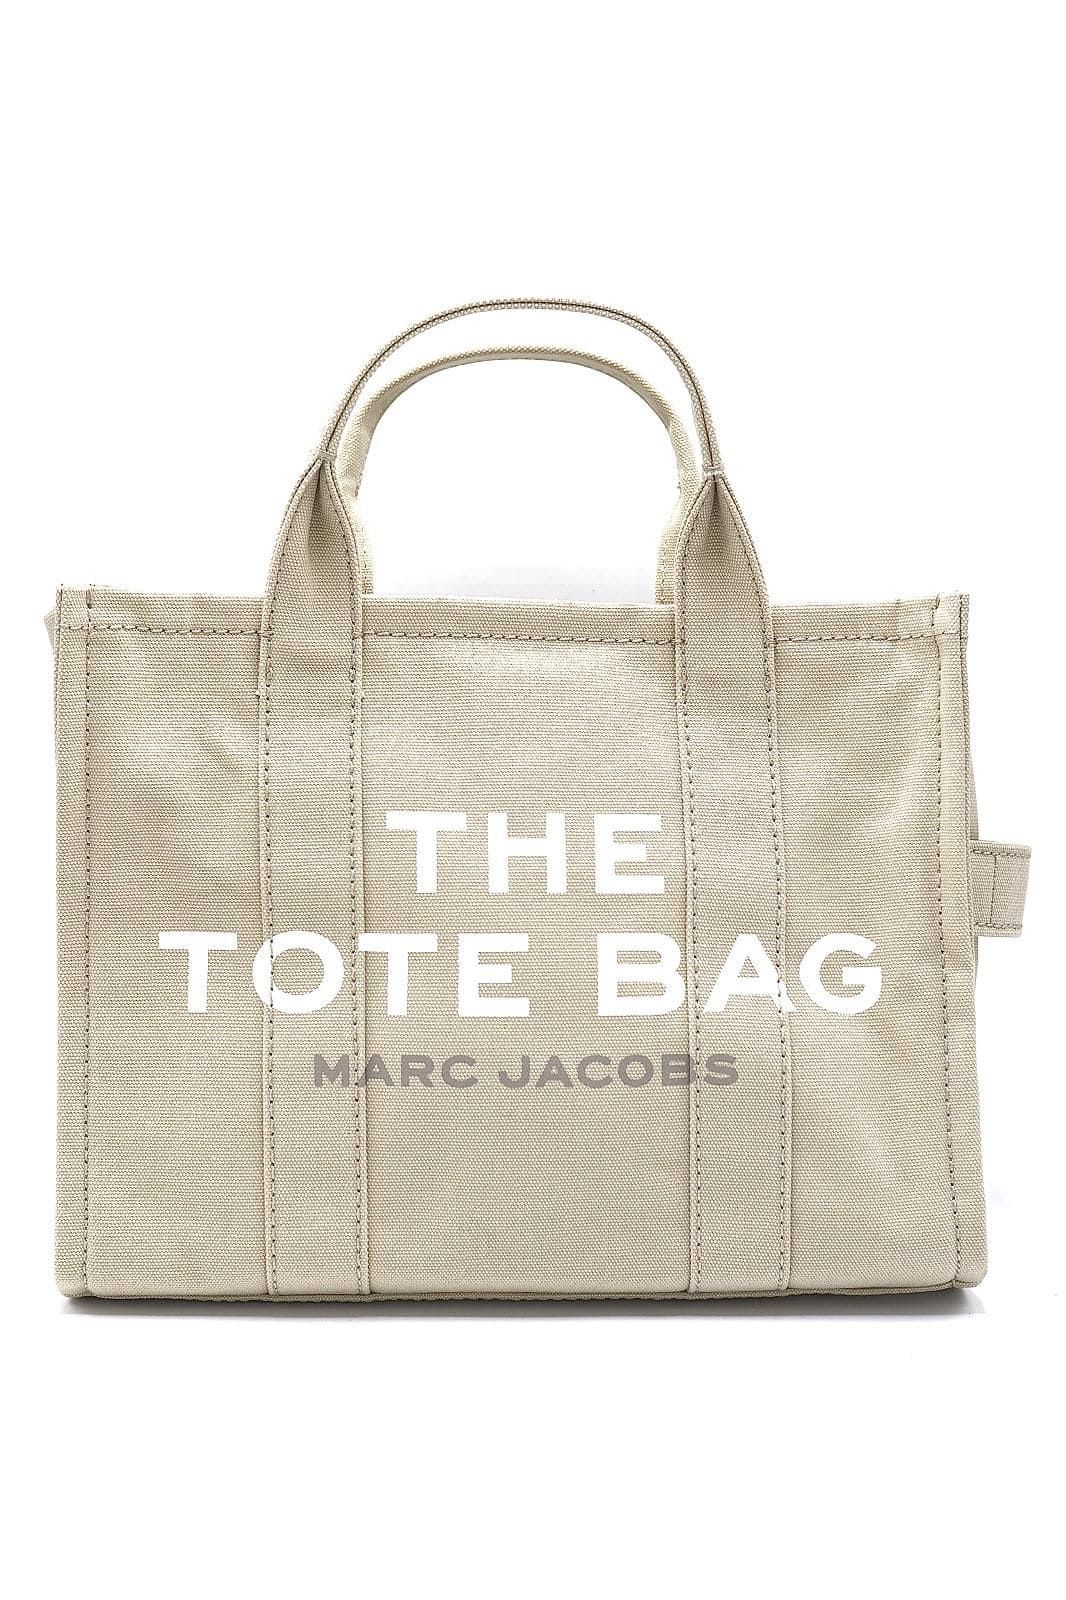 Marc Jacobs Sac cabas Beige femmes (MJACOBS-Small Travel Tote uni - TOTE BAG 16161 beige uni med) - Marine | Much more than shoes